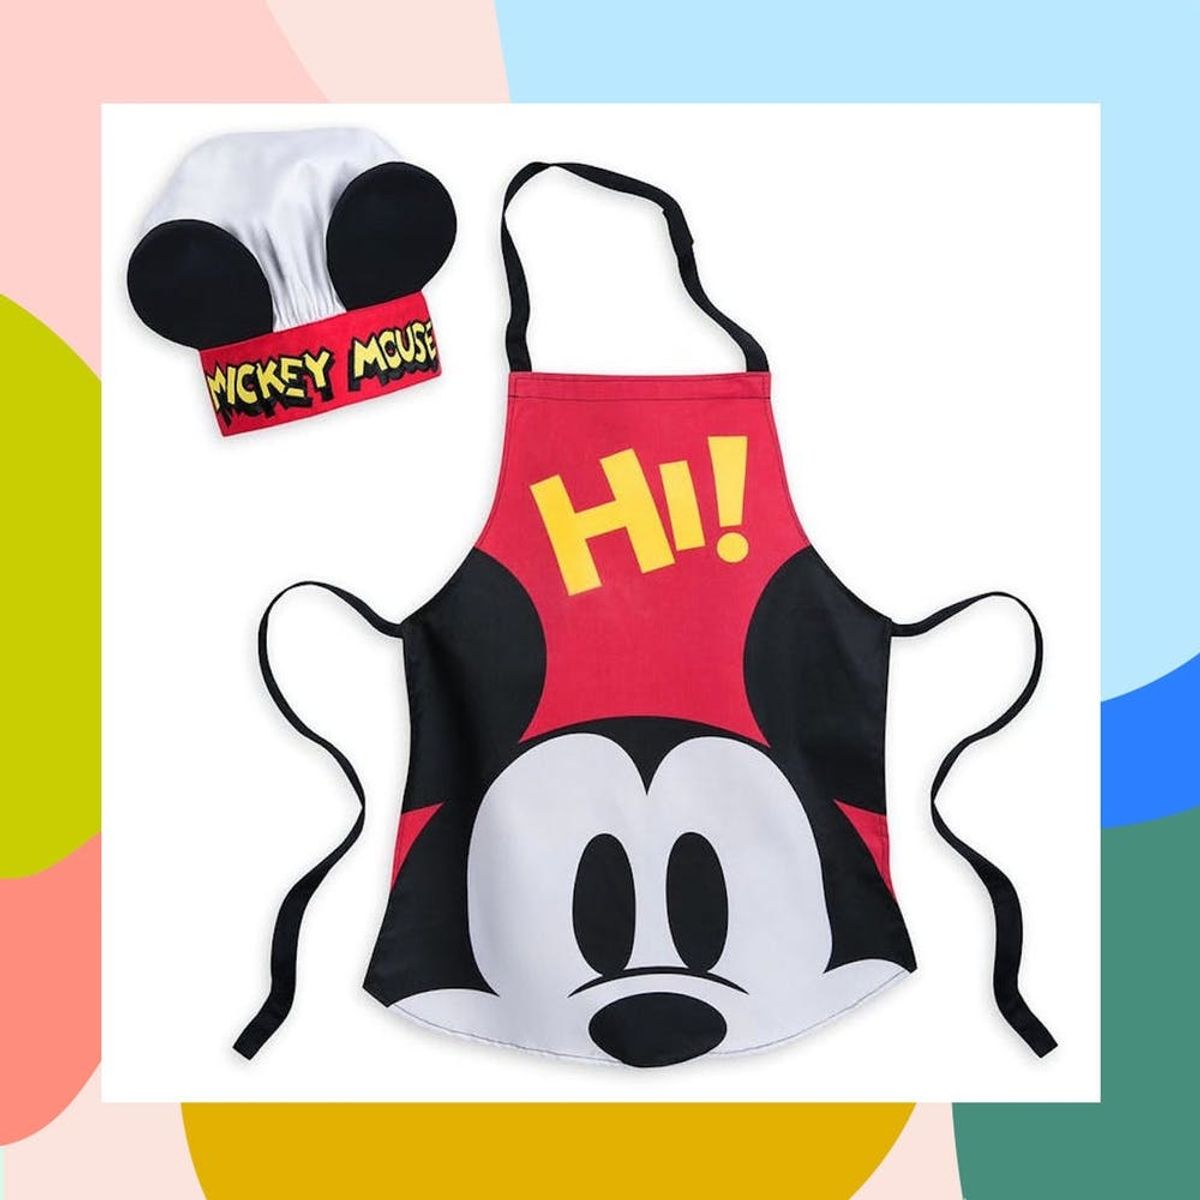 Disney Launched the Perfect Kitchenware Line for Cooking Up Magic